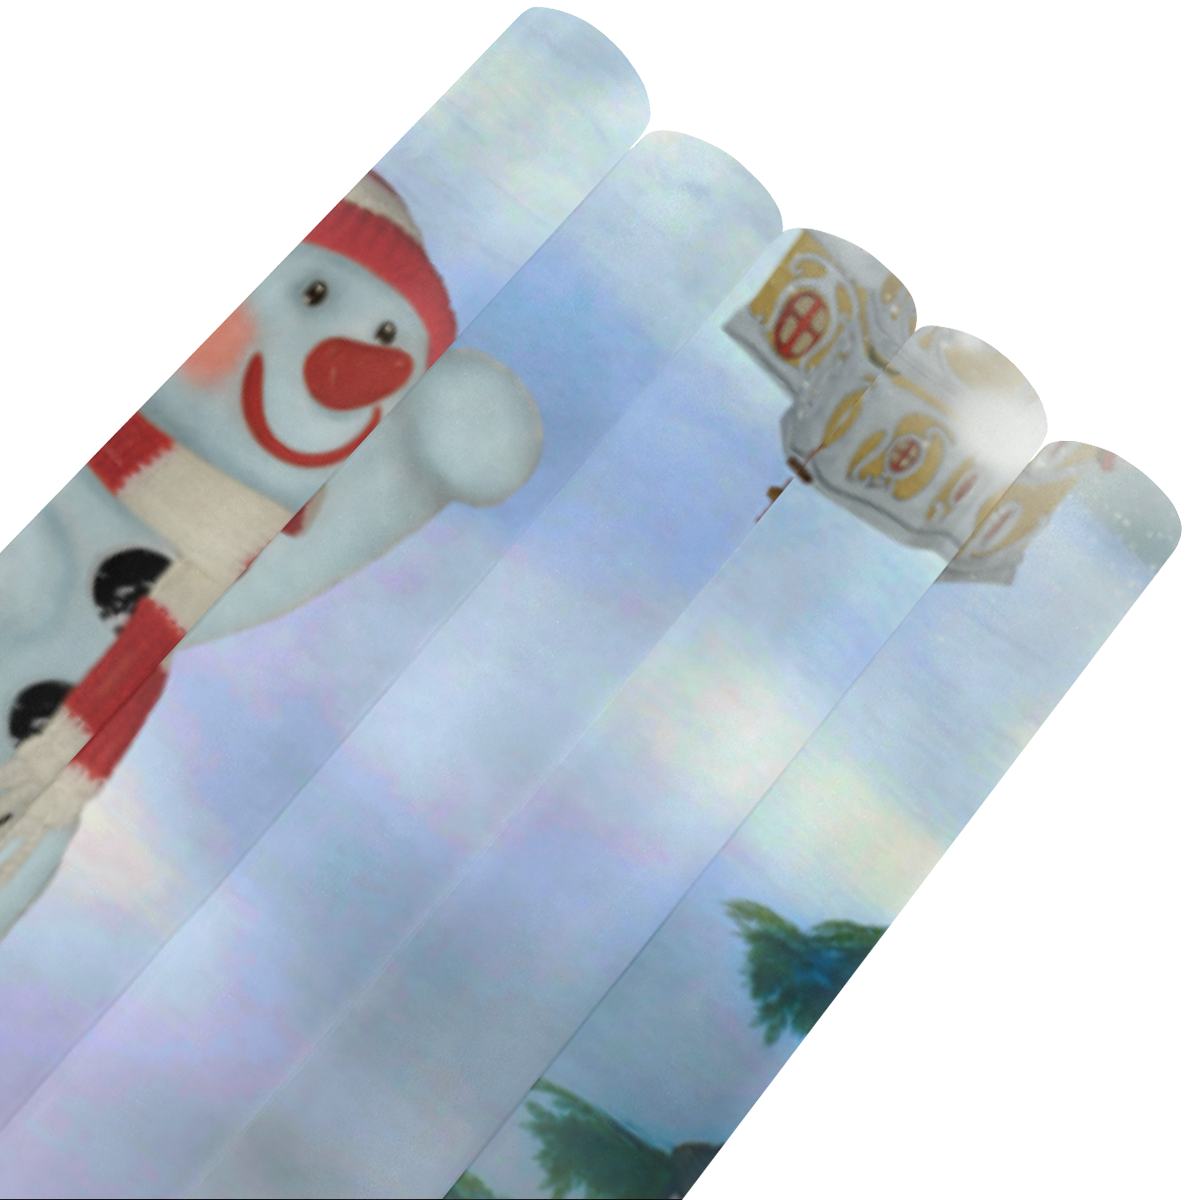 Santa Claus in the night Gift Wrapping Paper 58"x 23" (5 Rolls)